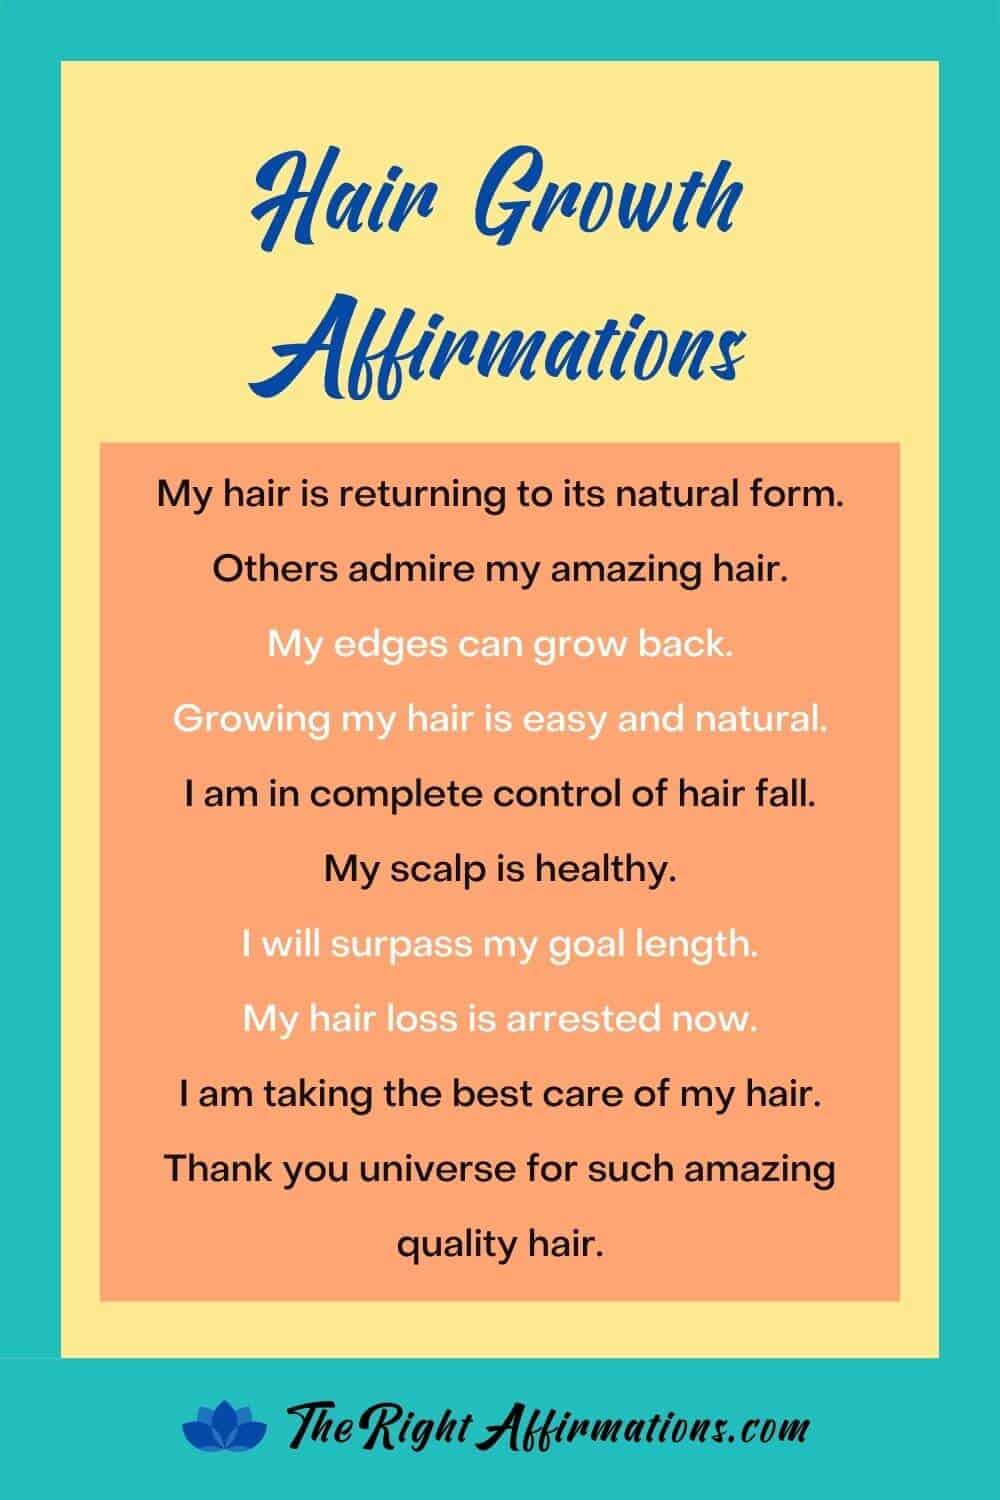 affirmations for hair growth pinterest